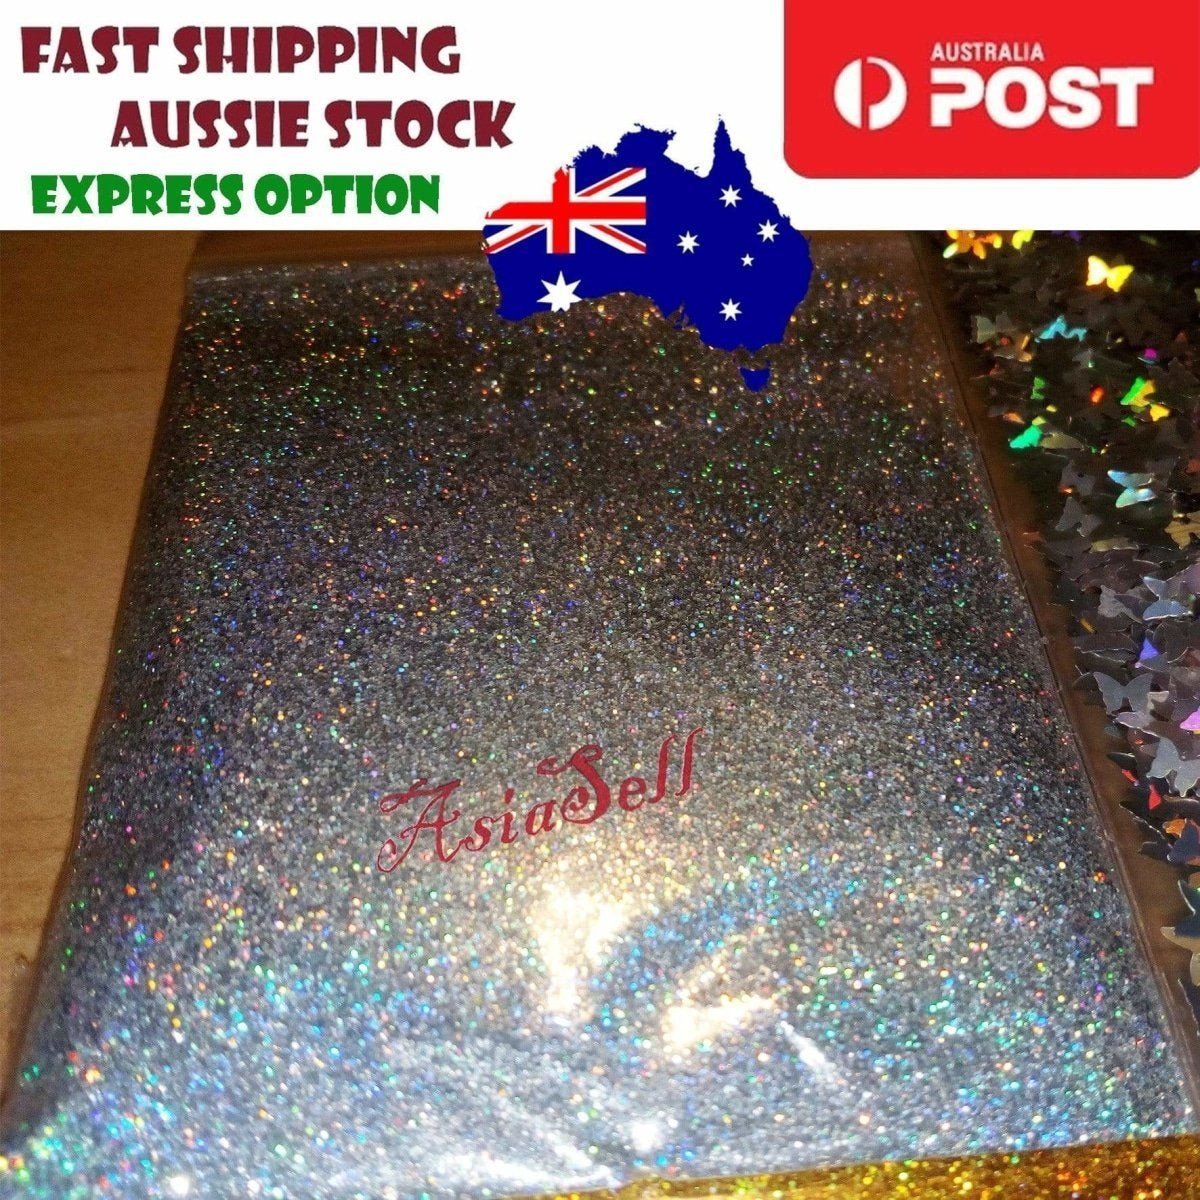 10g Holographic Nail Art Decals Silver Gold Stars Butterflies Bling Decorations 0.2mm - Silver fine powder - - Asia Sell